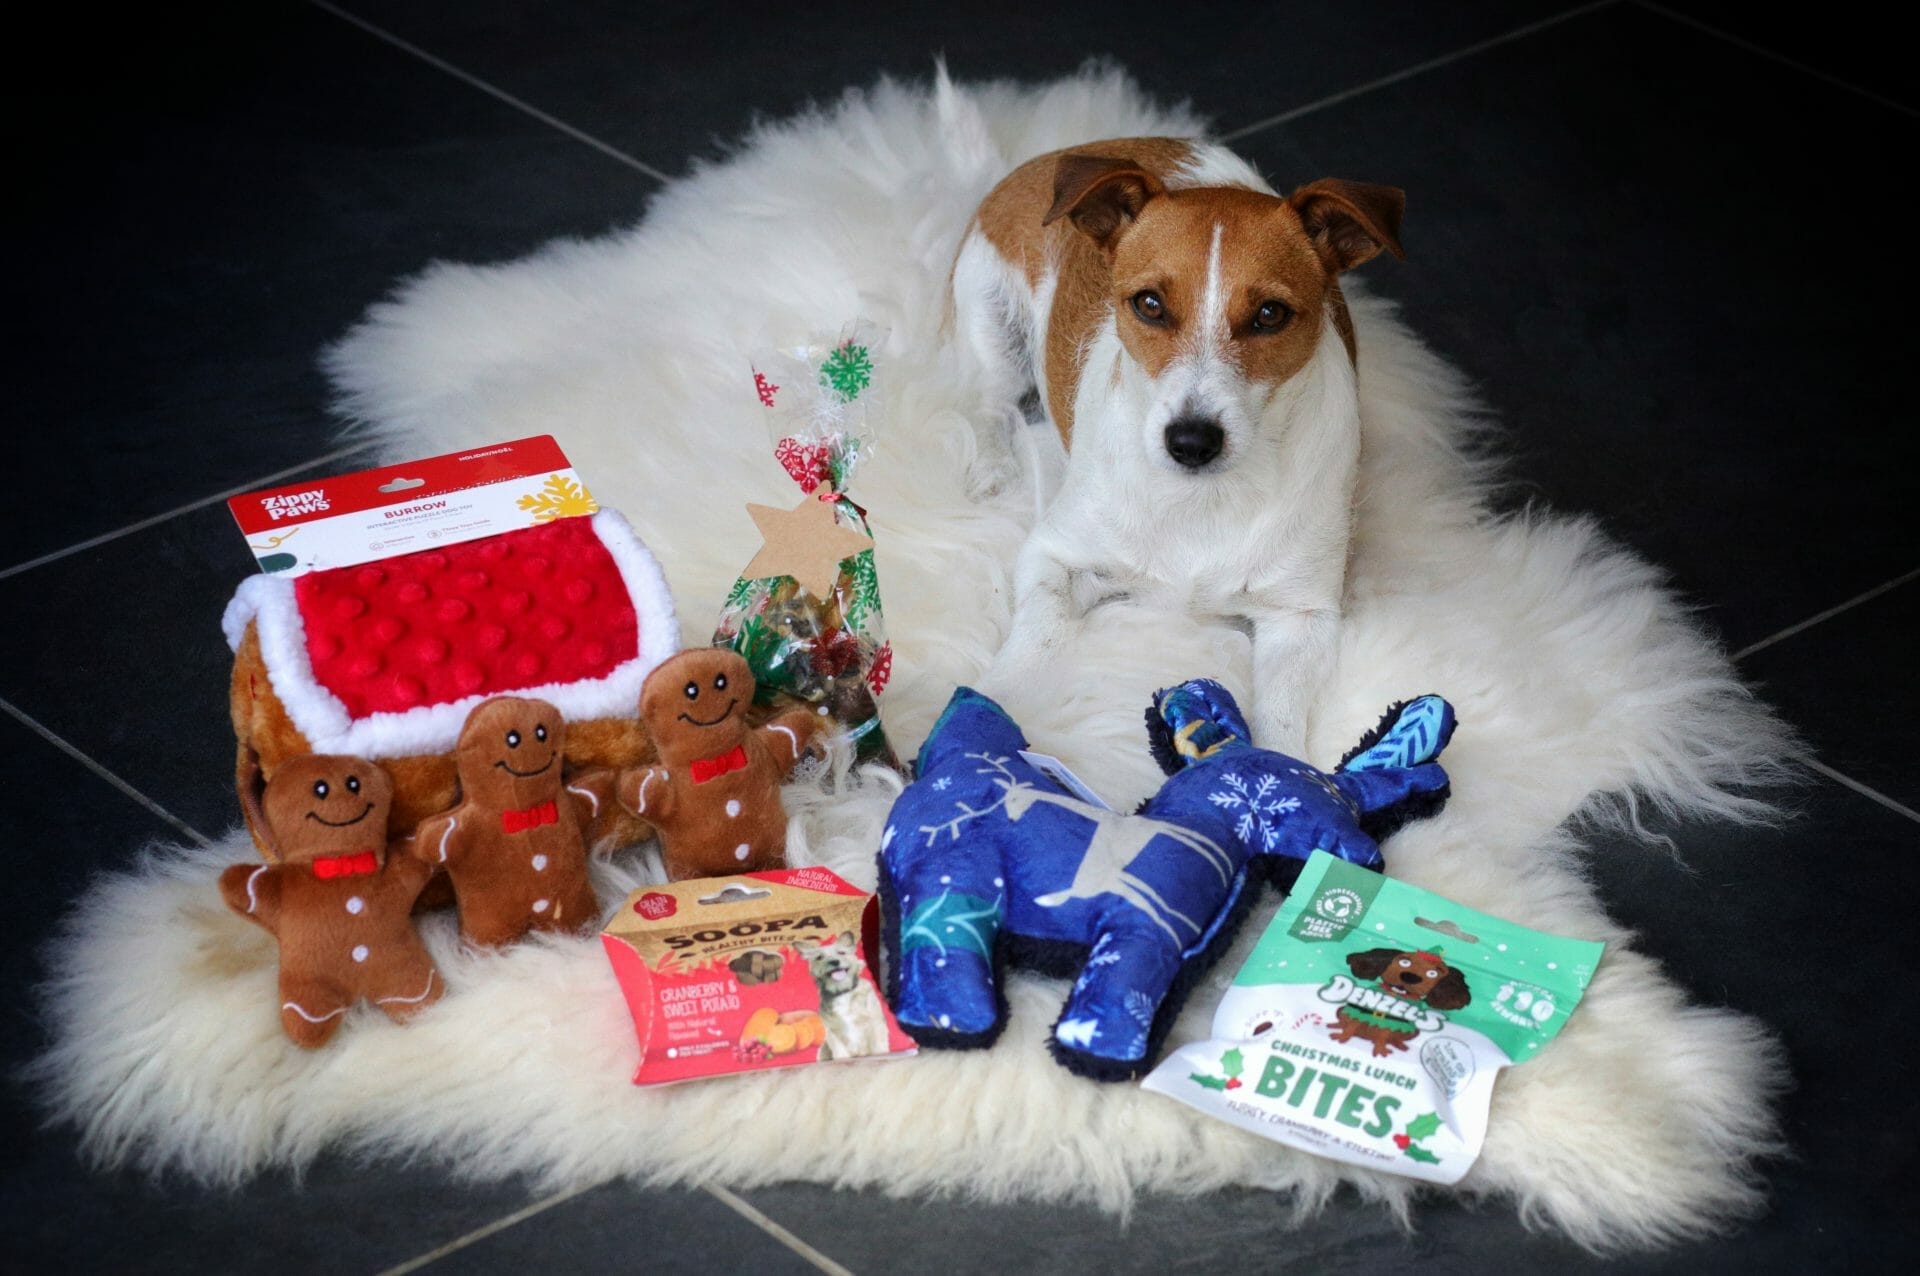 The Best Gifts for Dogs This Christmas